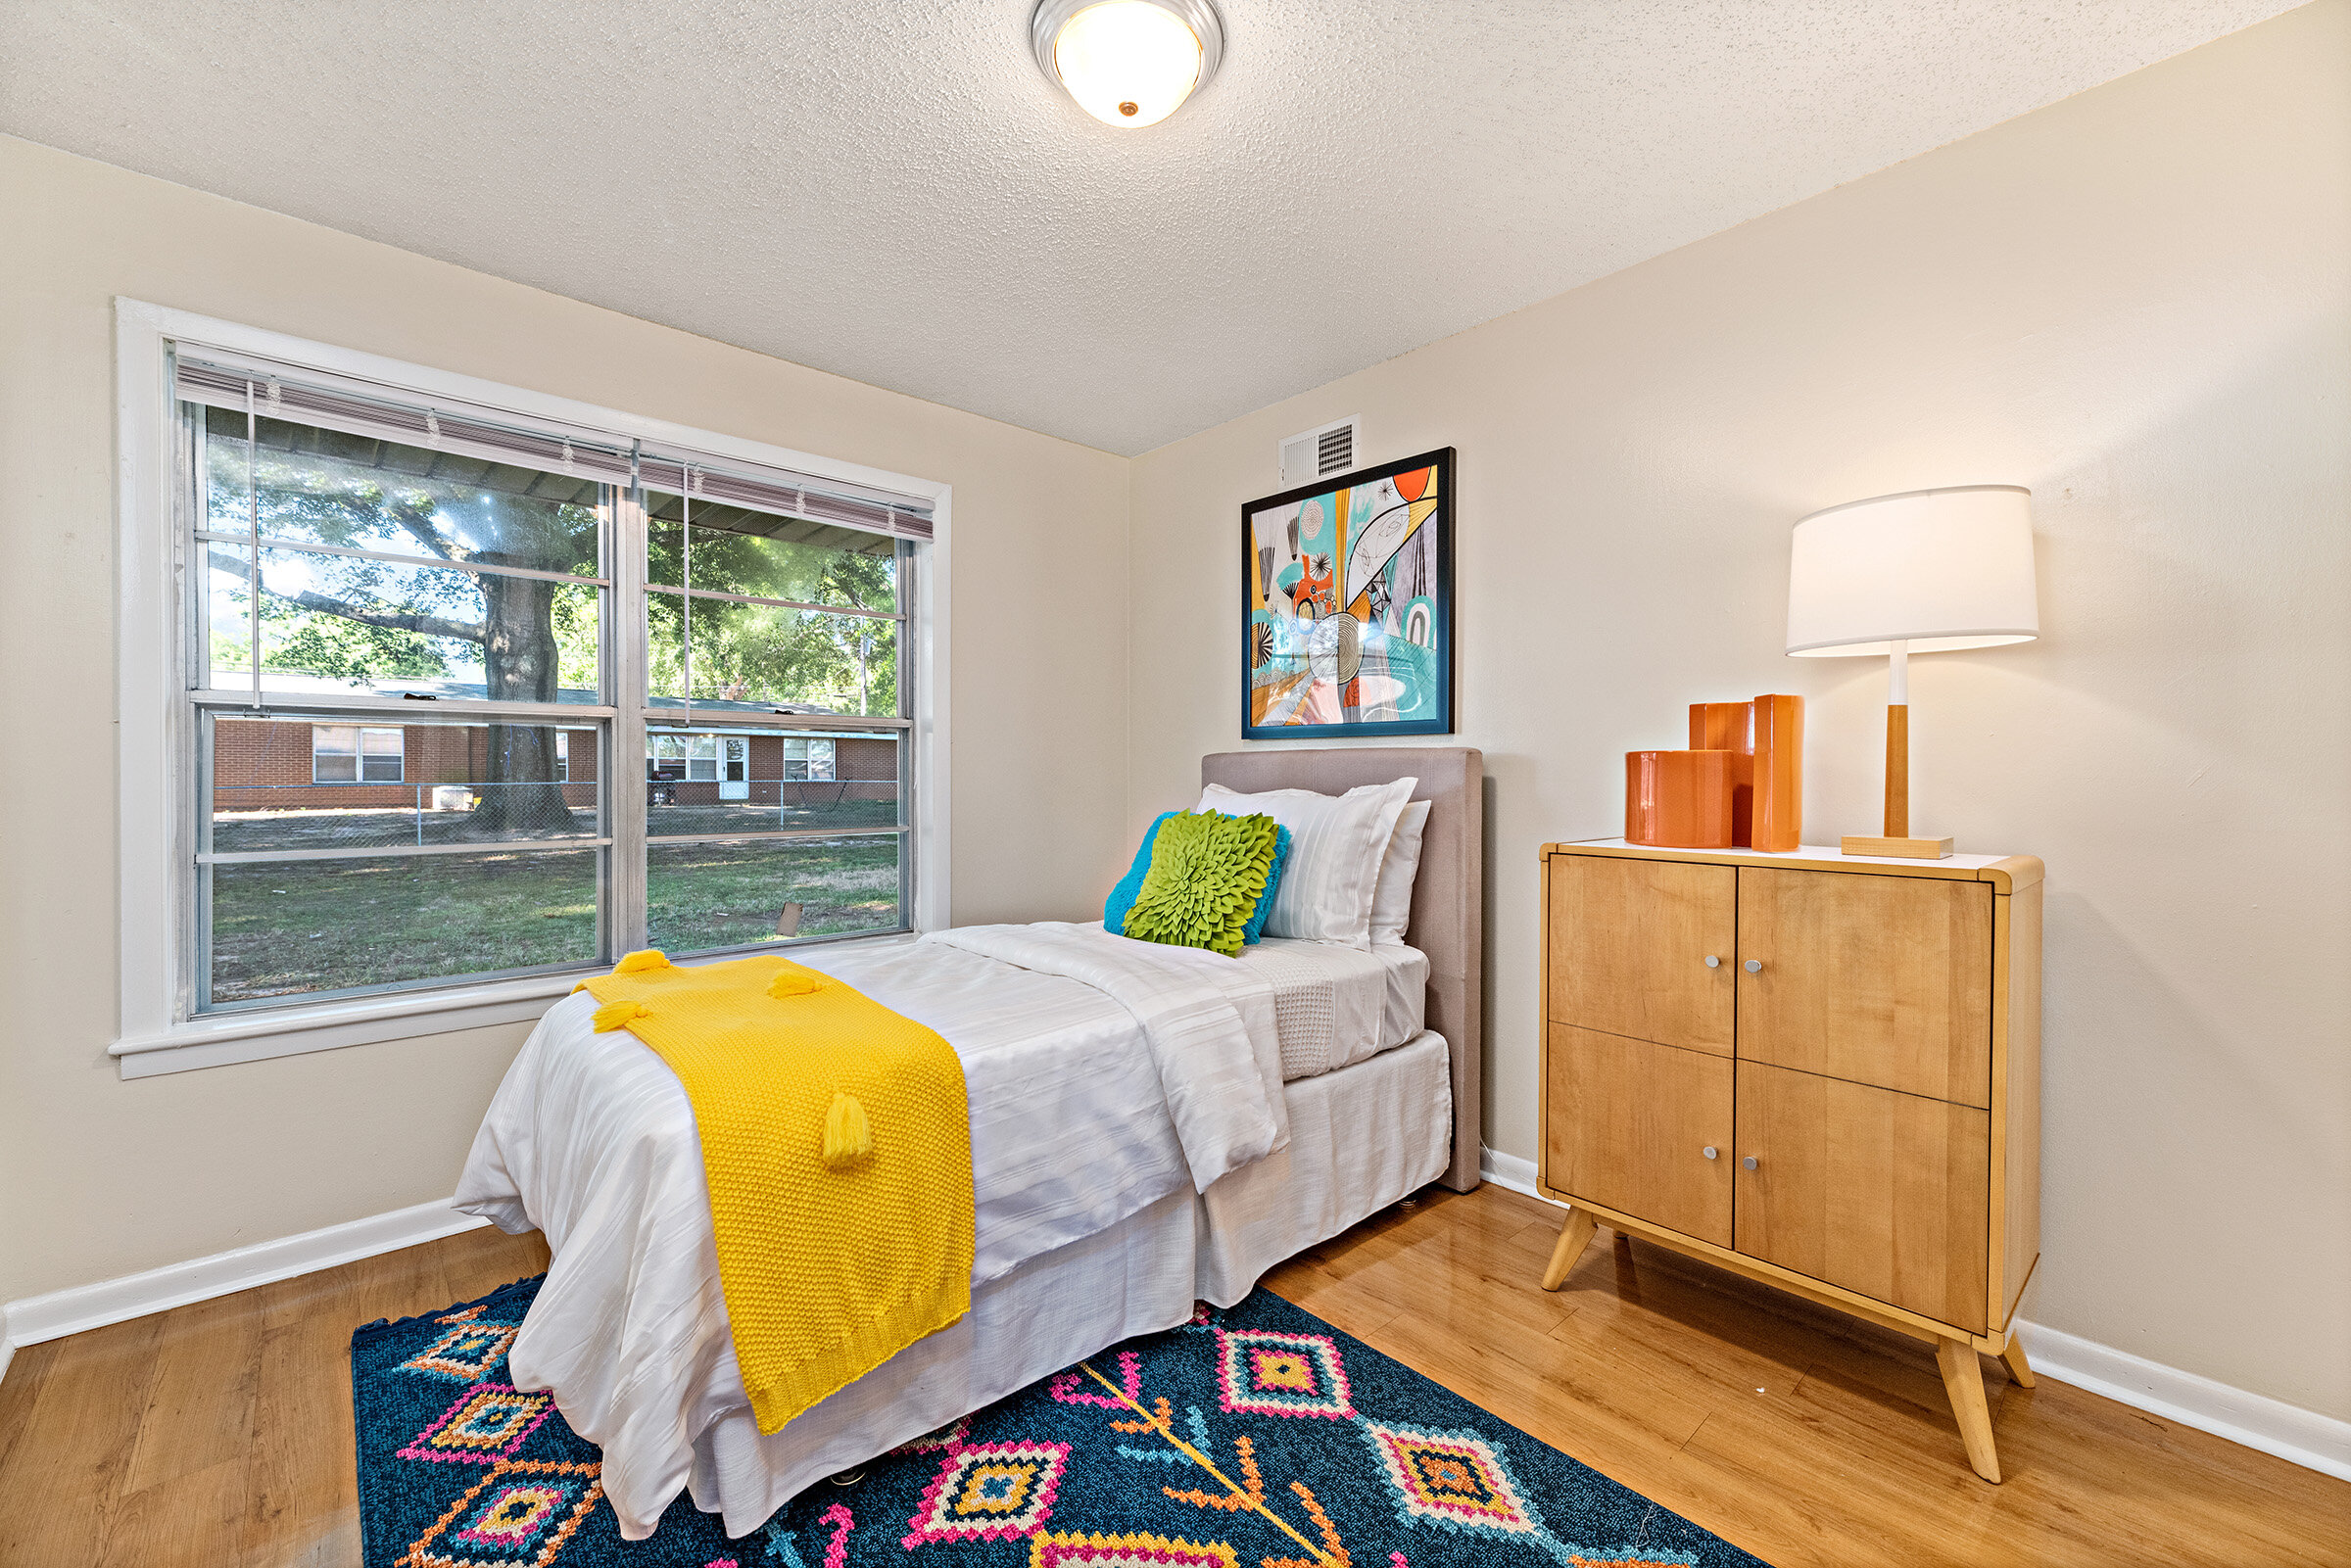  Spacious children’s bedrooms at The Villages at Fort Moore. 